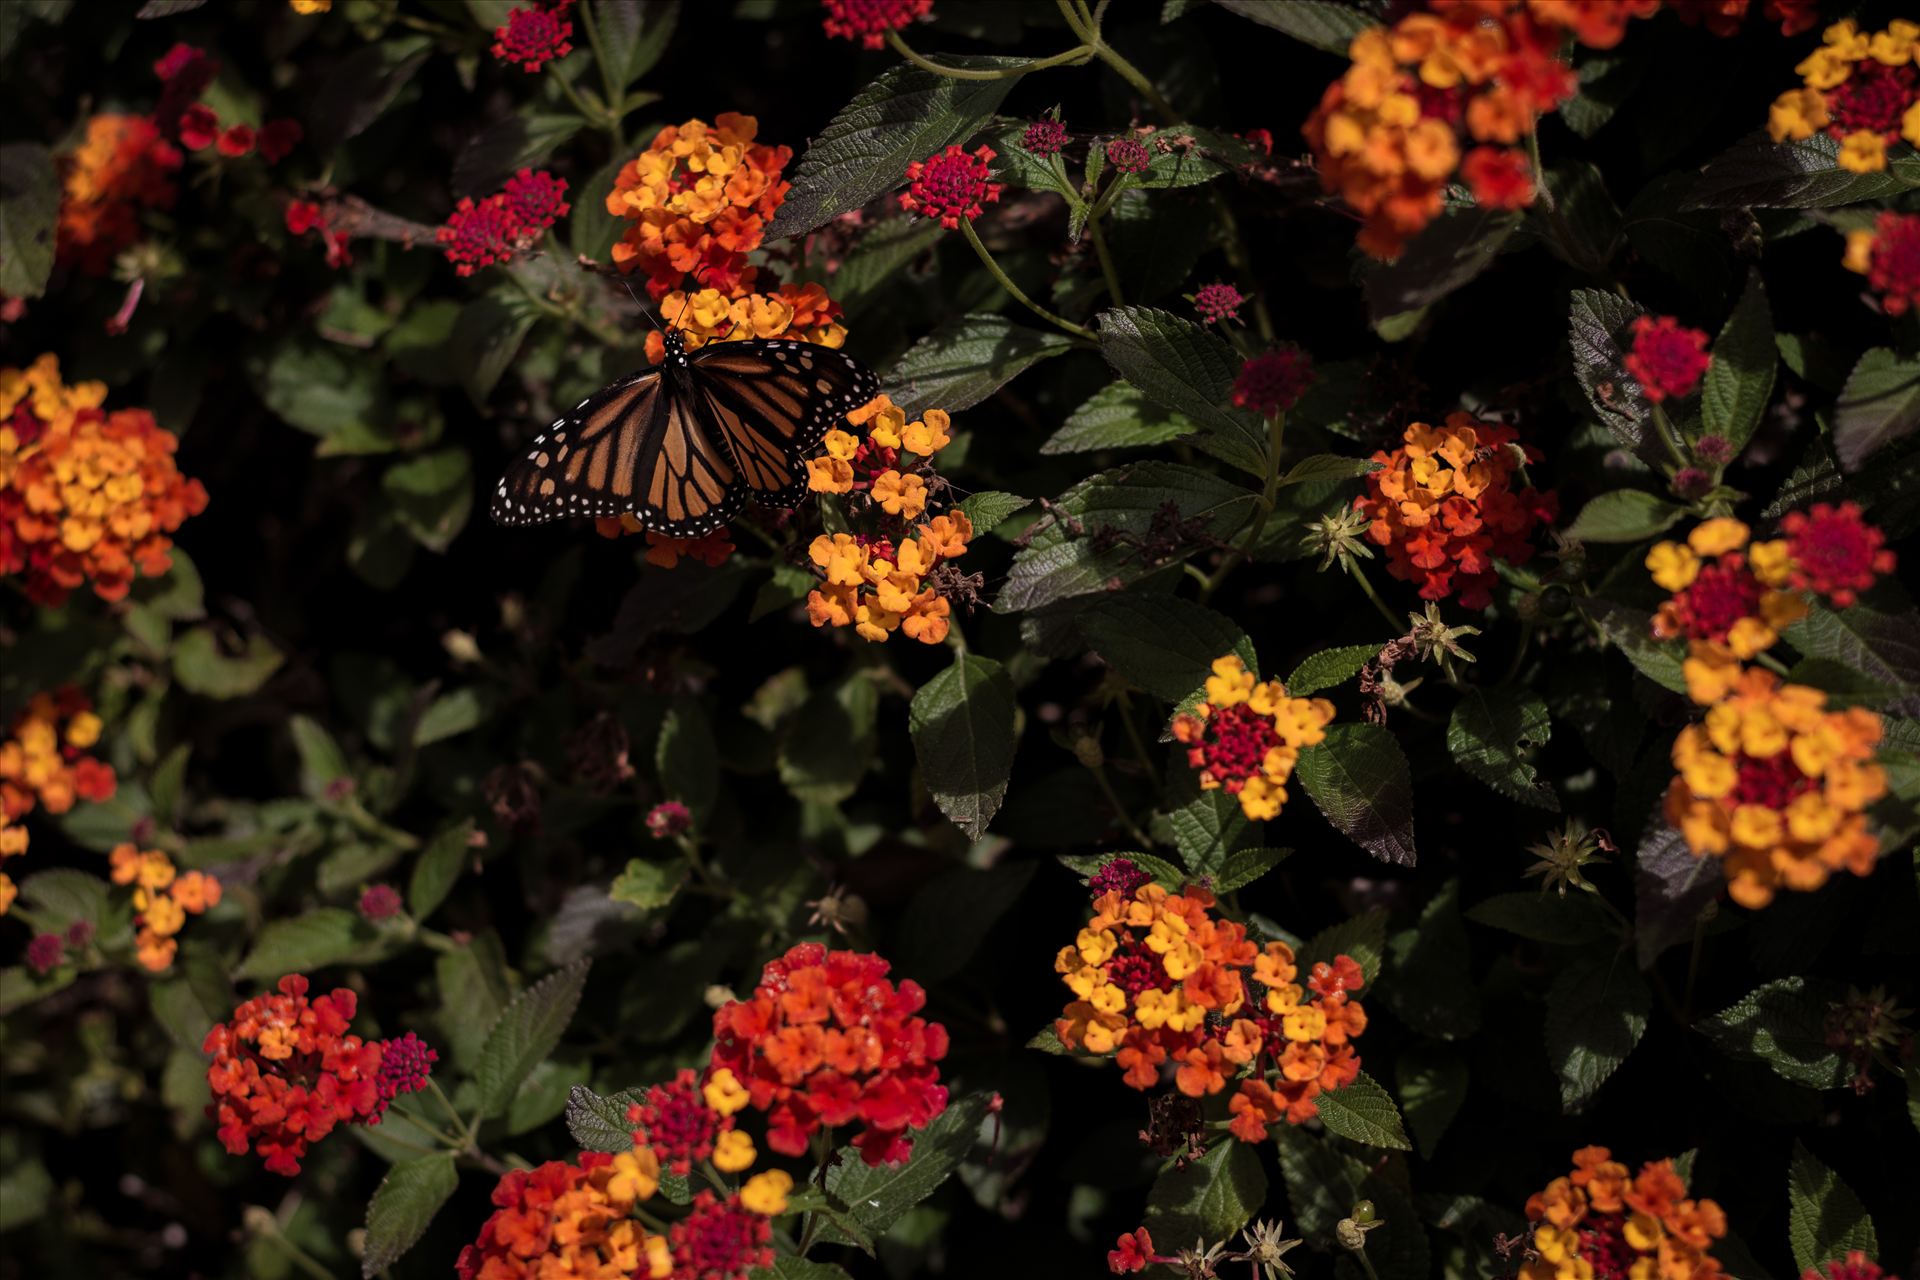 Butterfly Dawn.jpg - Monarch butterfly landing on bright flowers on California's Central Coast near Pismo Beach. by Sarah Williams